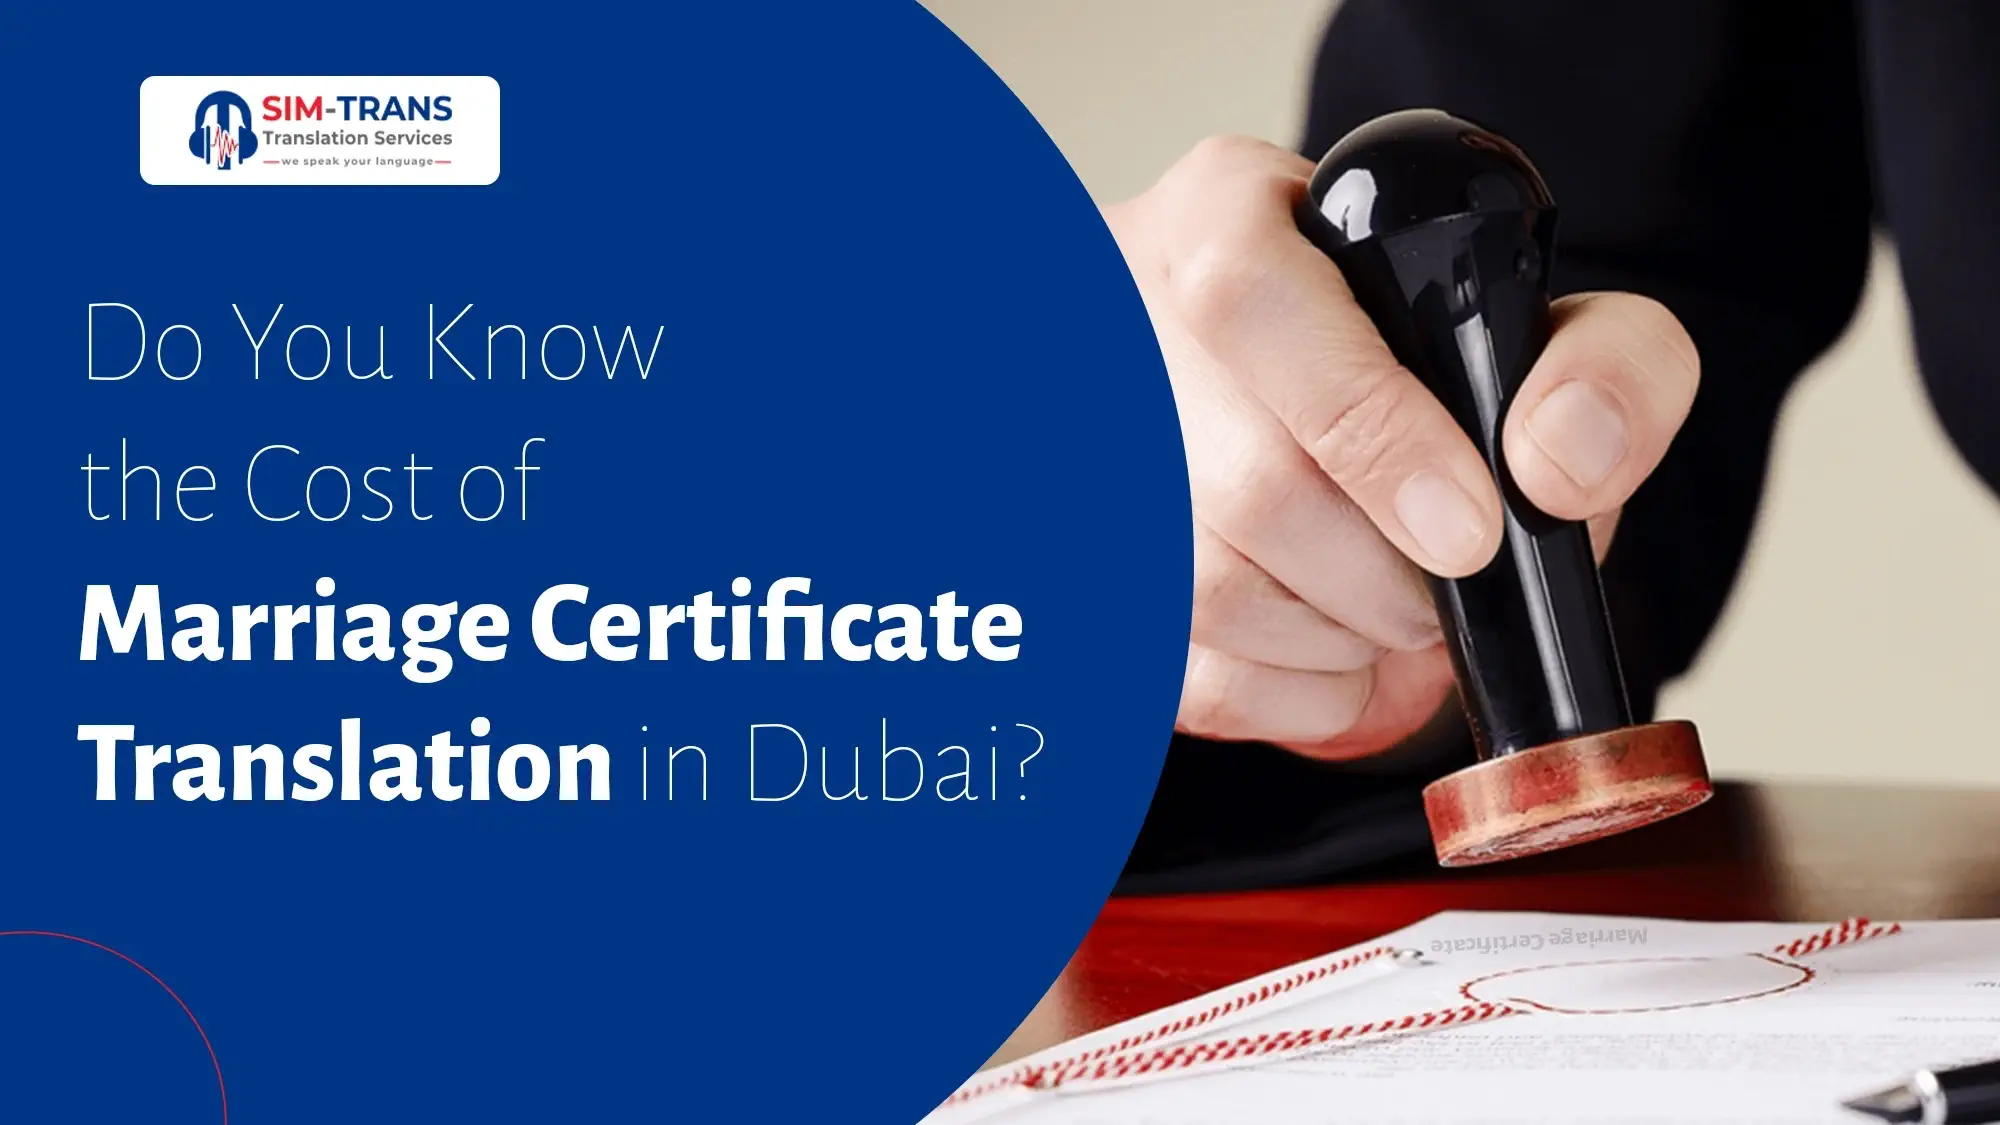 How Much Does Marriage Certificate Translation Cost in Dubai?